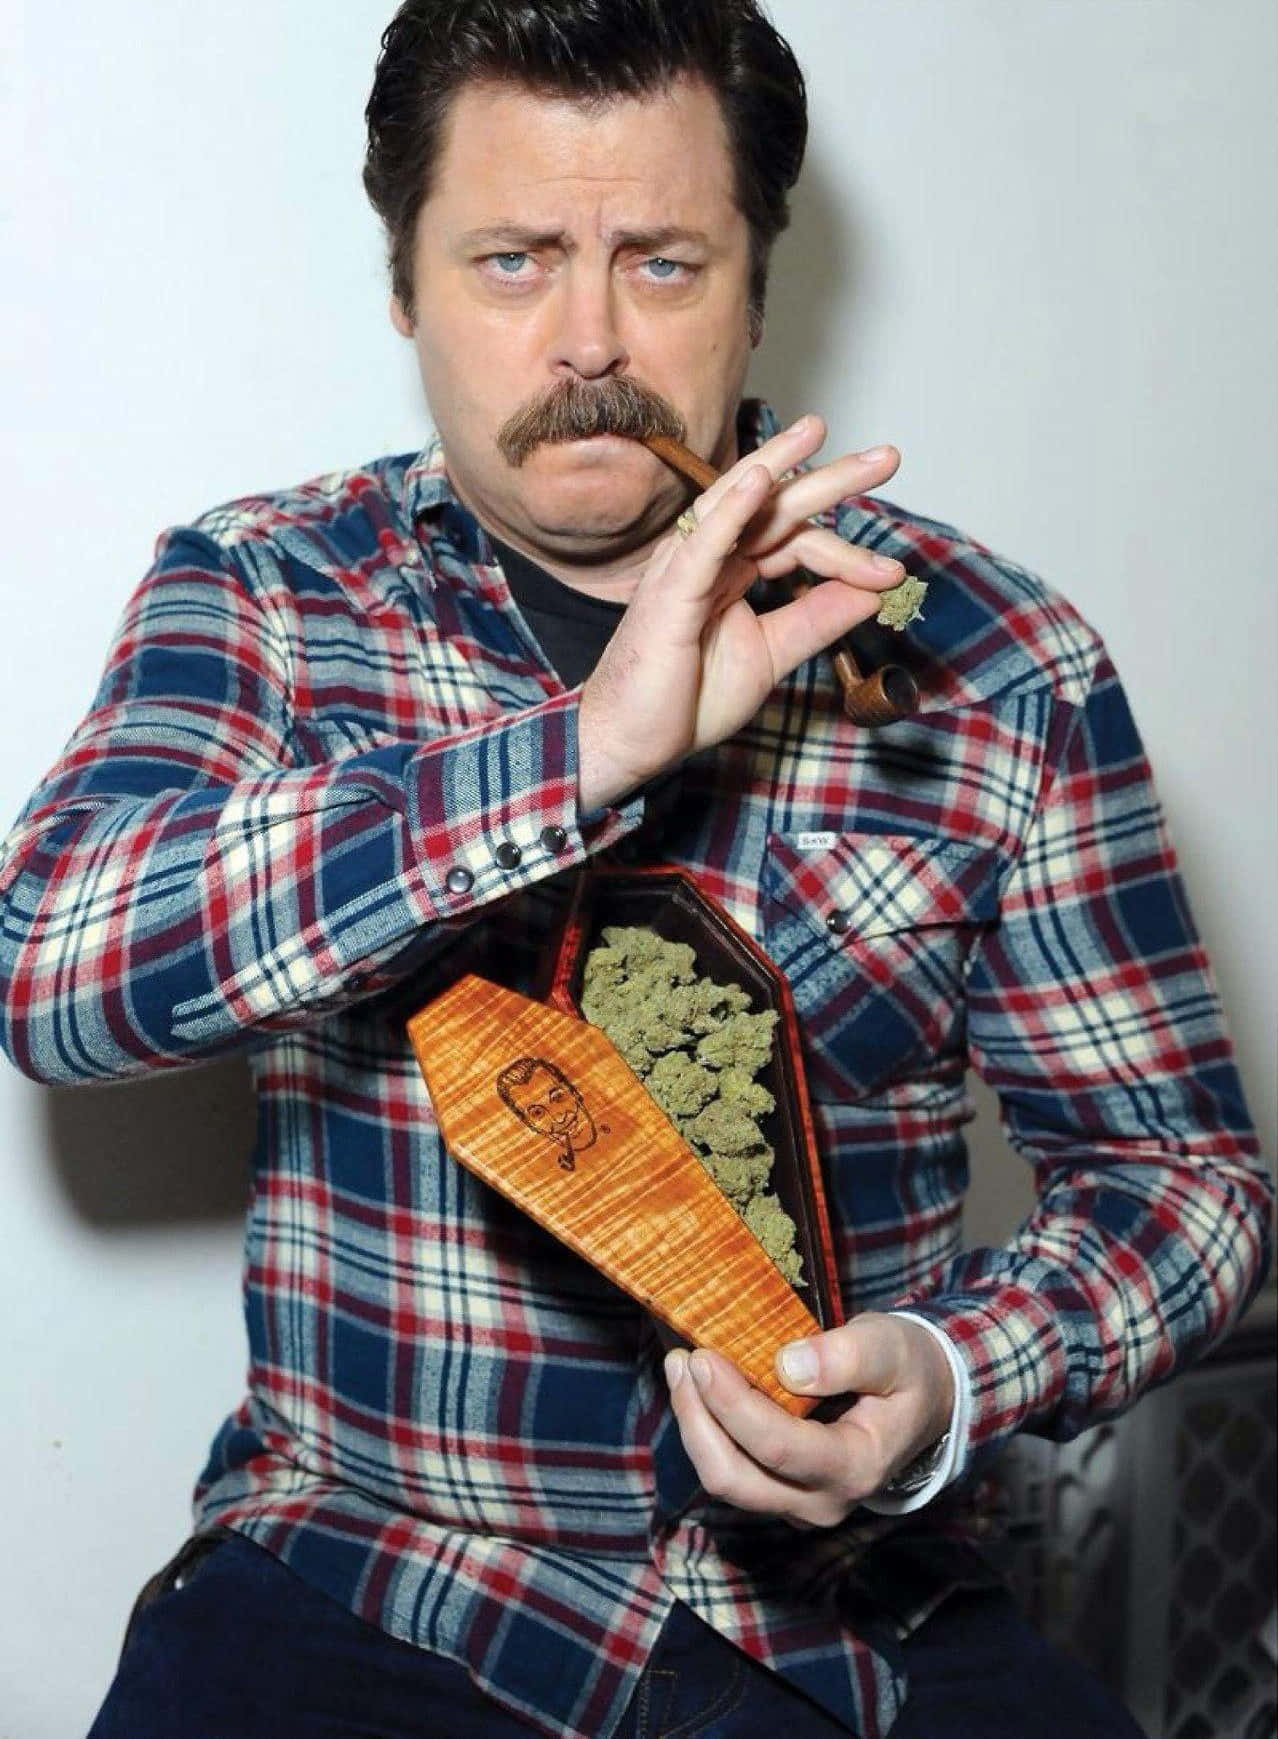 Actor Nick Offerman Looking Into The Camera